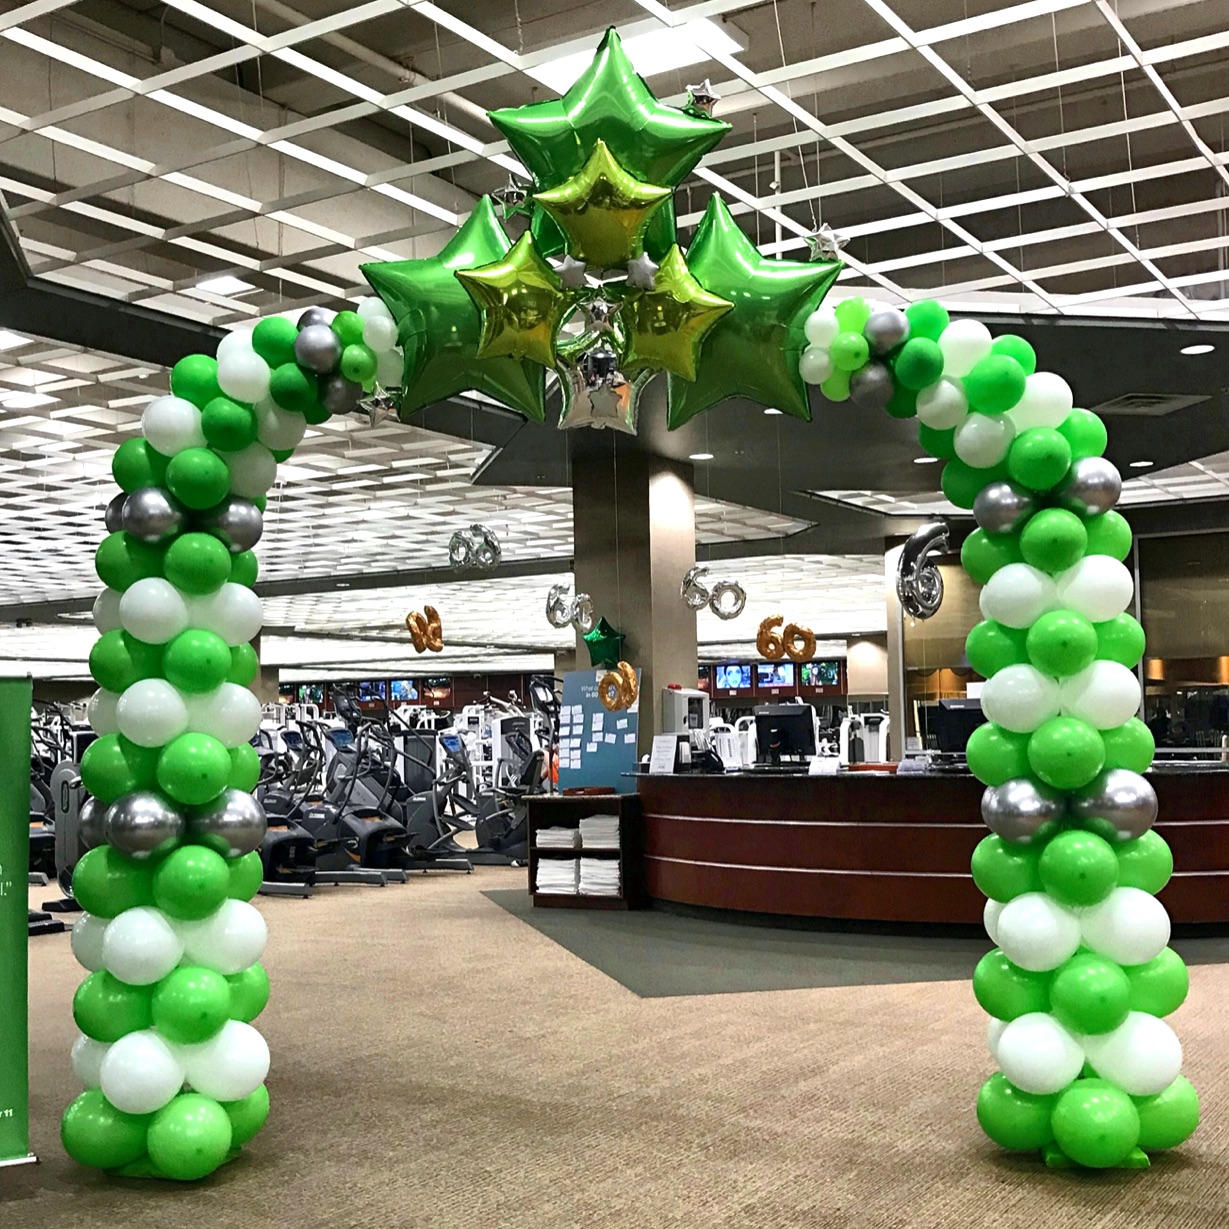 Foil stars are the center focal point of this color blocked lime, white and chrome silver arch.